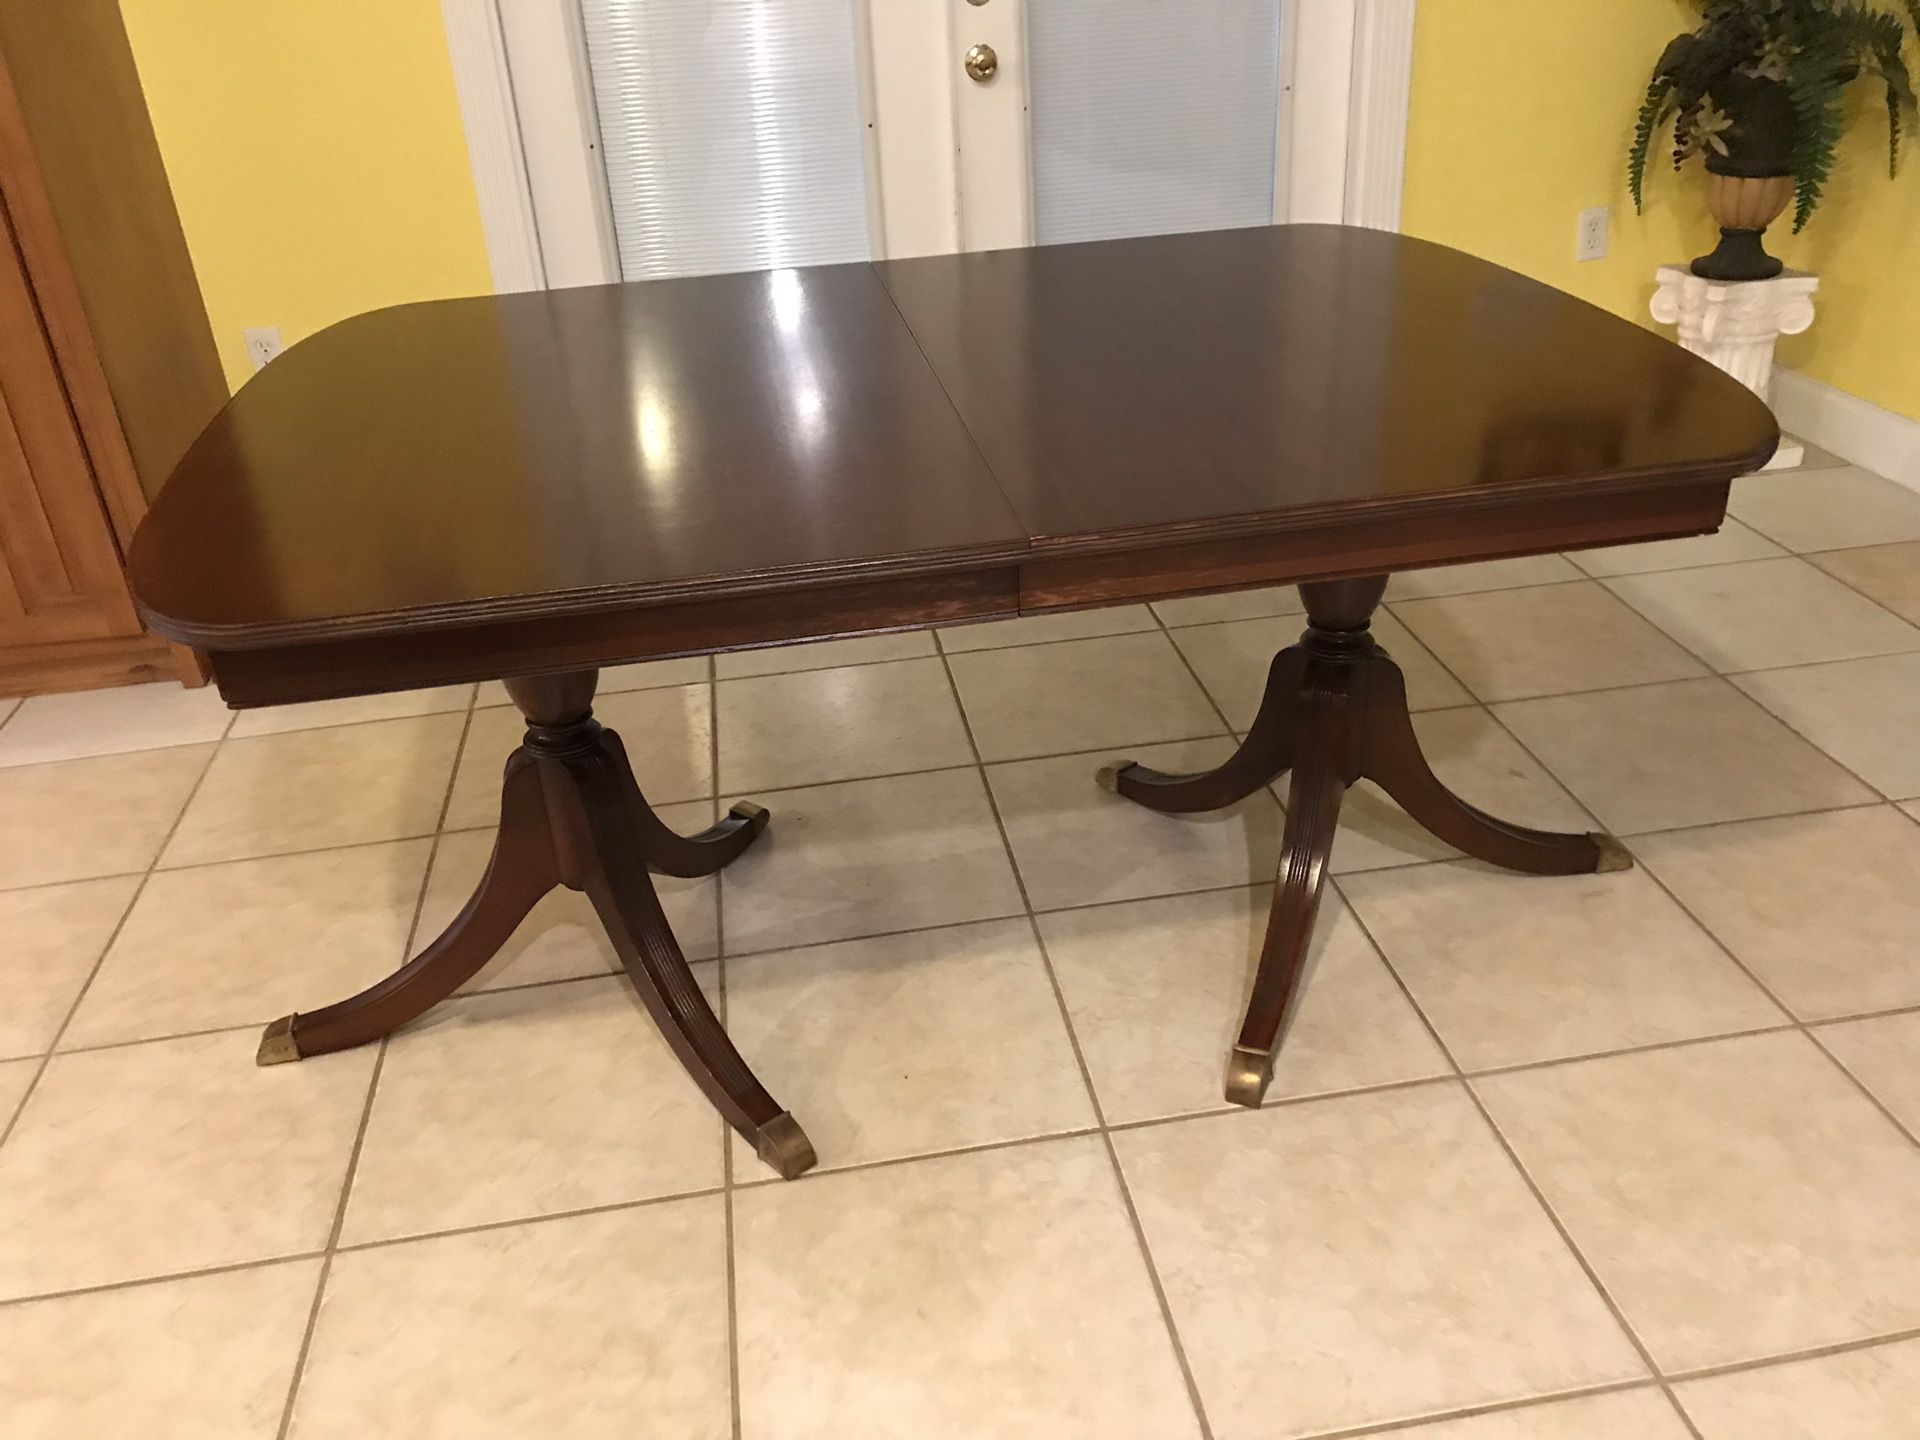 Antique table and chairs Trogdon Furniture Company No. 172